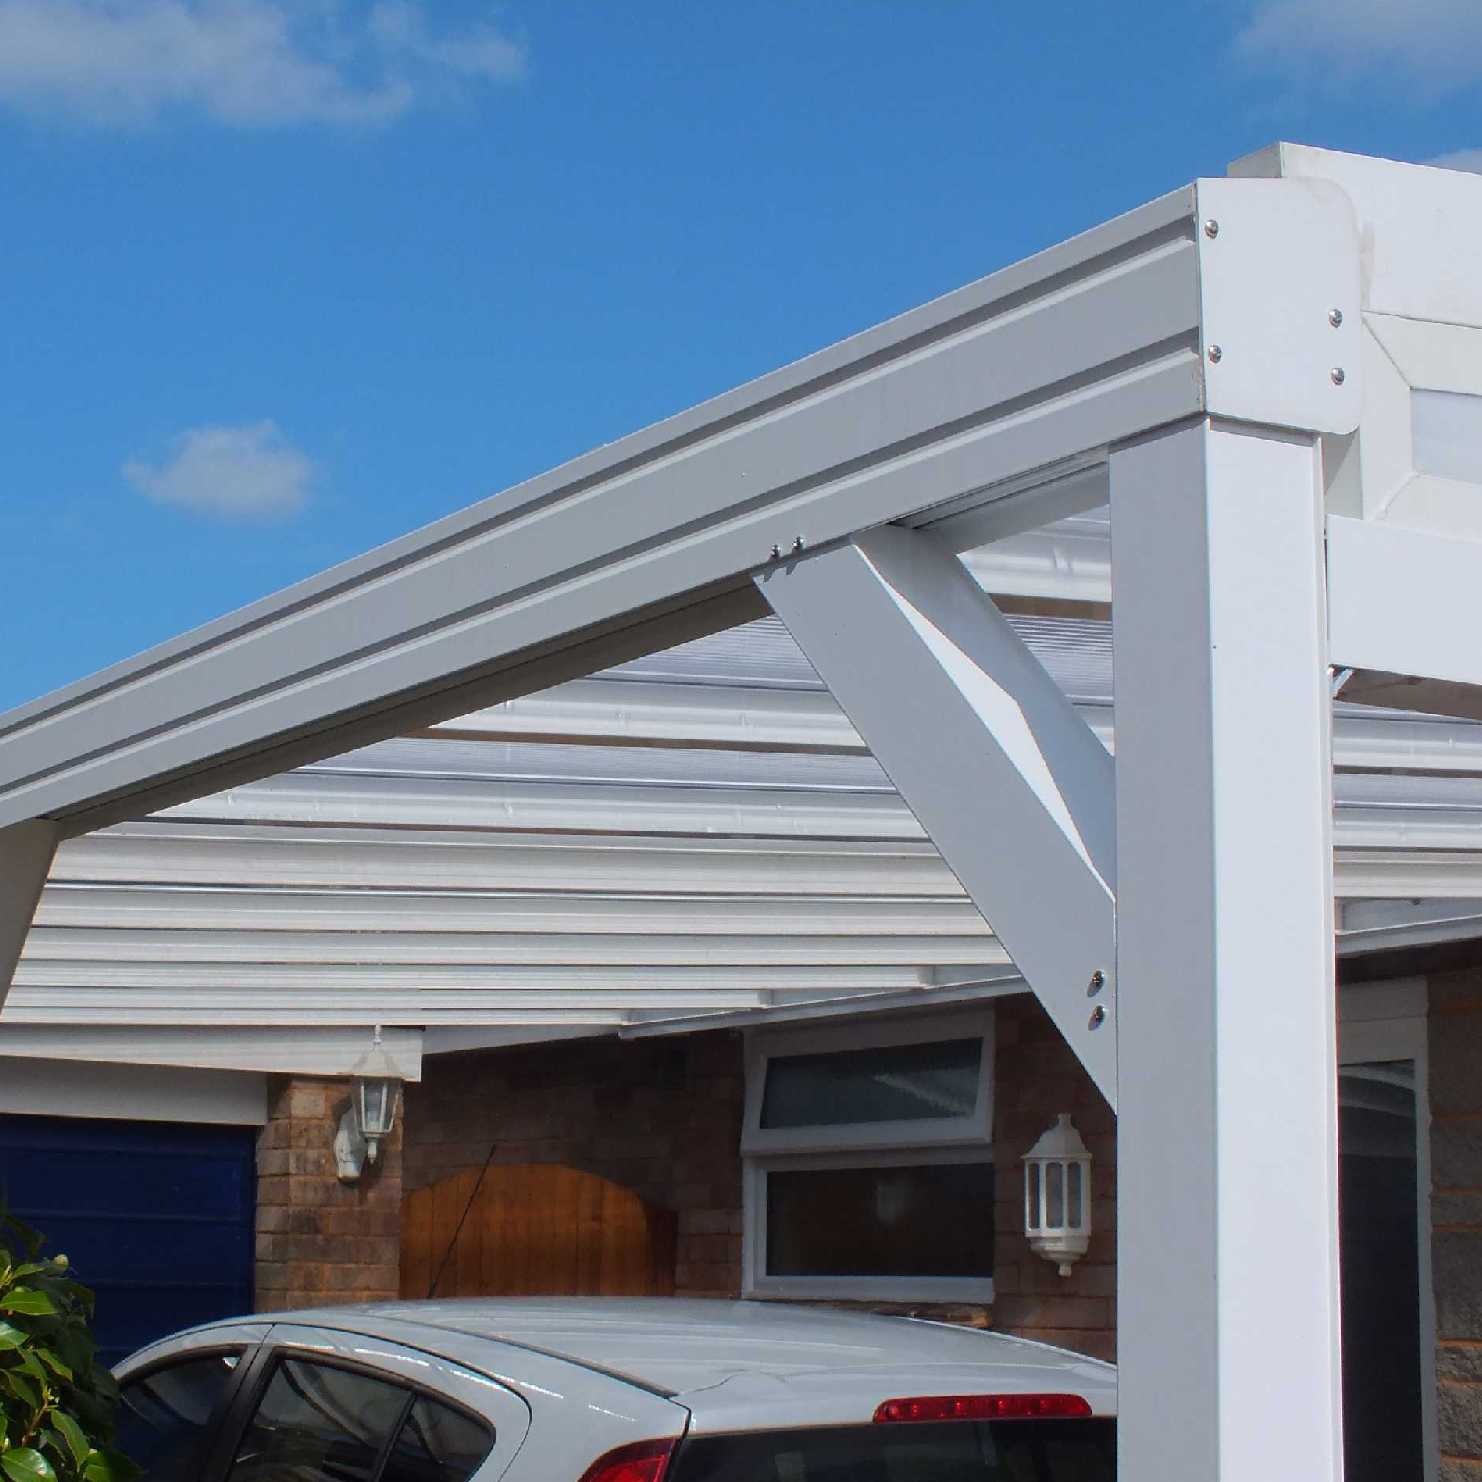 Buy Omega Smart Lean-To Canopy, White with 16mm Polycarbonate Glazing - 9.2m (W) x 3.5m (P), (5) Supporting Posts online today